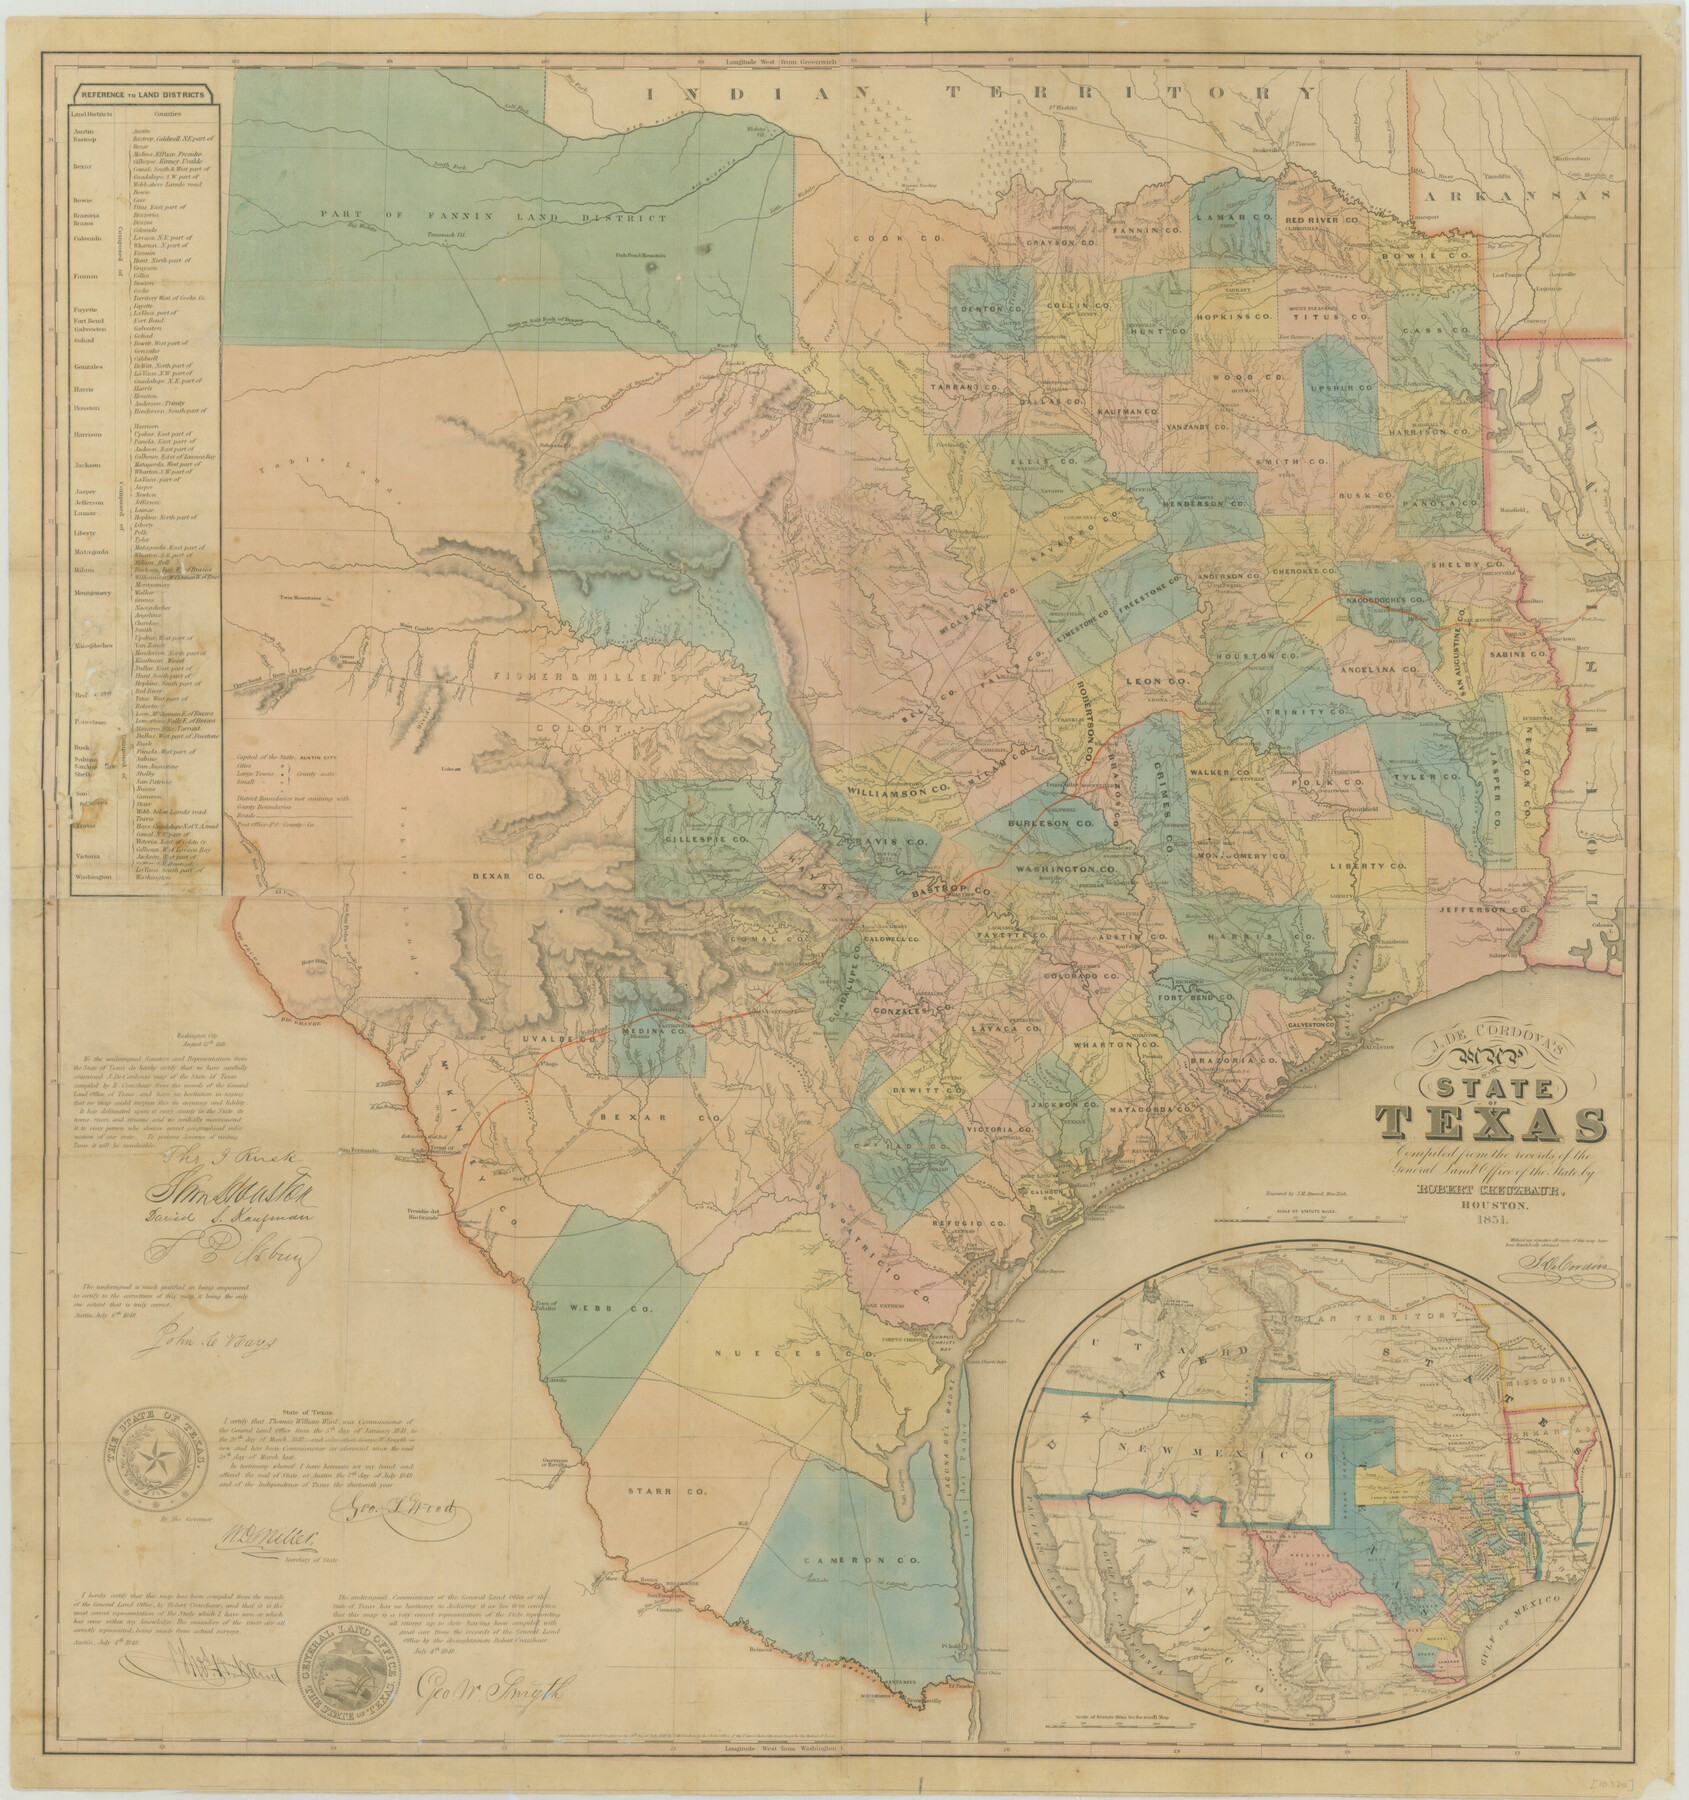 76223, J. De Cordova's Map of the State of Texas Compiled from the records of the General Land Office of the State, Texas State Library and Archives